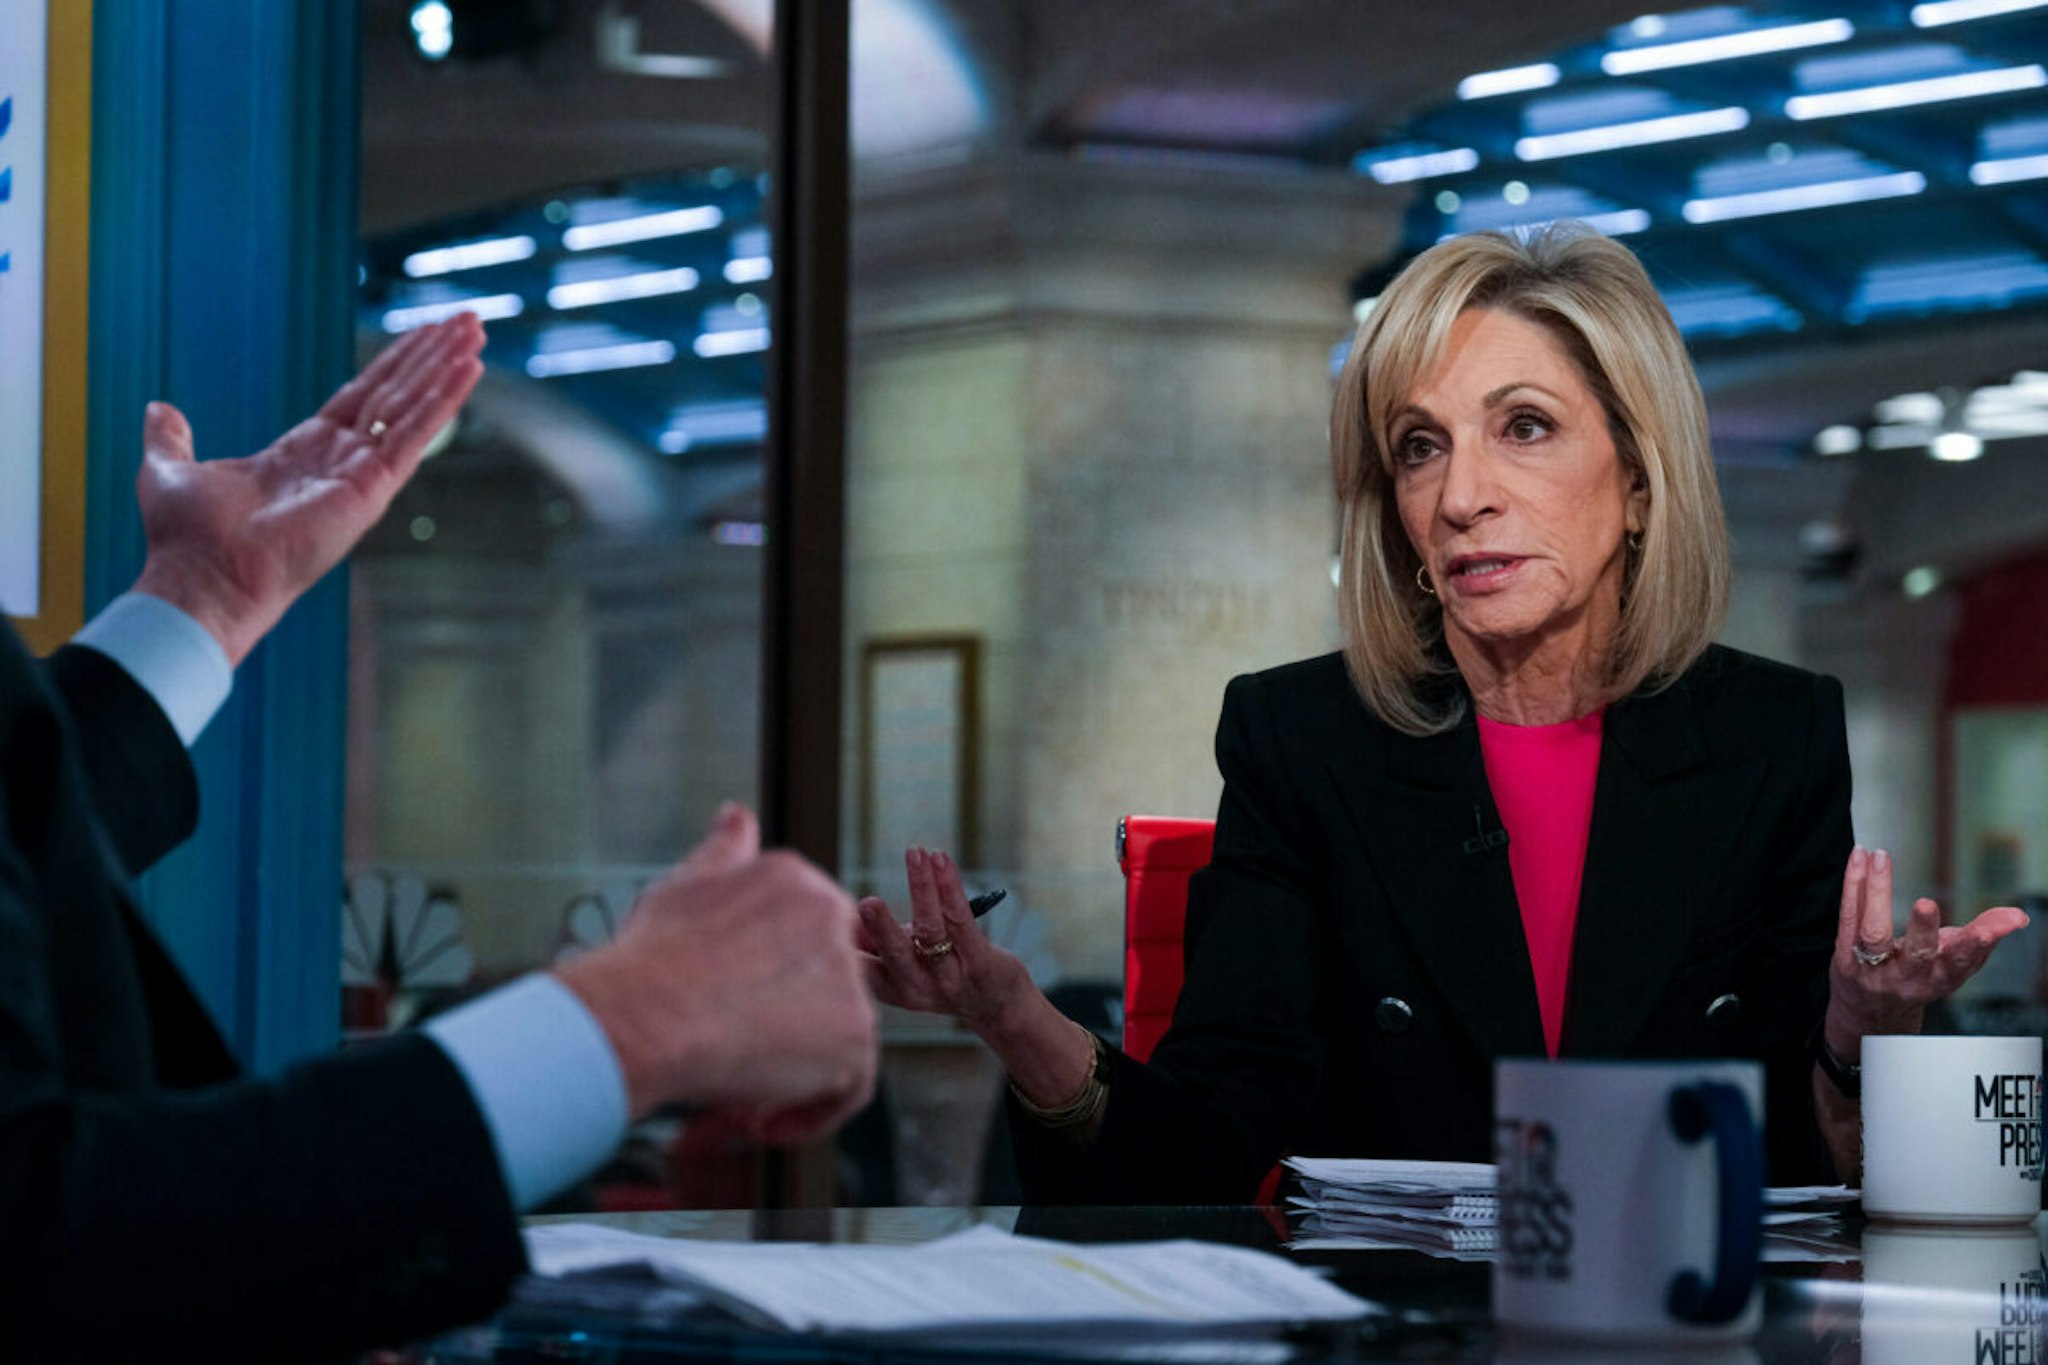 MEET THE PRESS -- Pictured: Andrea Mitchell, NBC News Chief Washington Correspondent and Chief Foreign Affairs Correspondent, appears on Meet the Press in Washington, D.C. Sunday, Feb. 5, 2023.